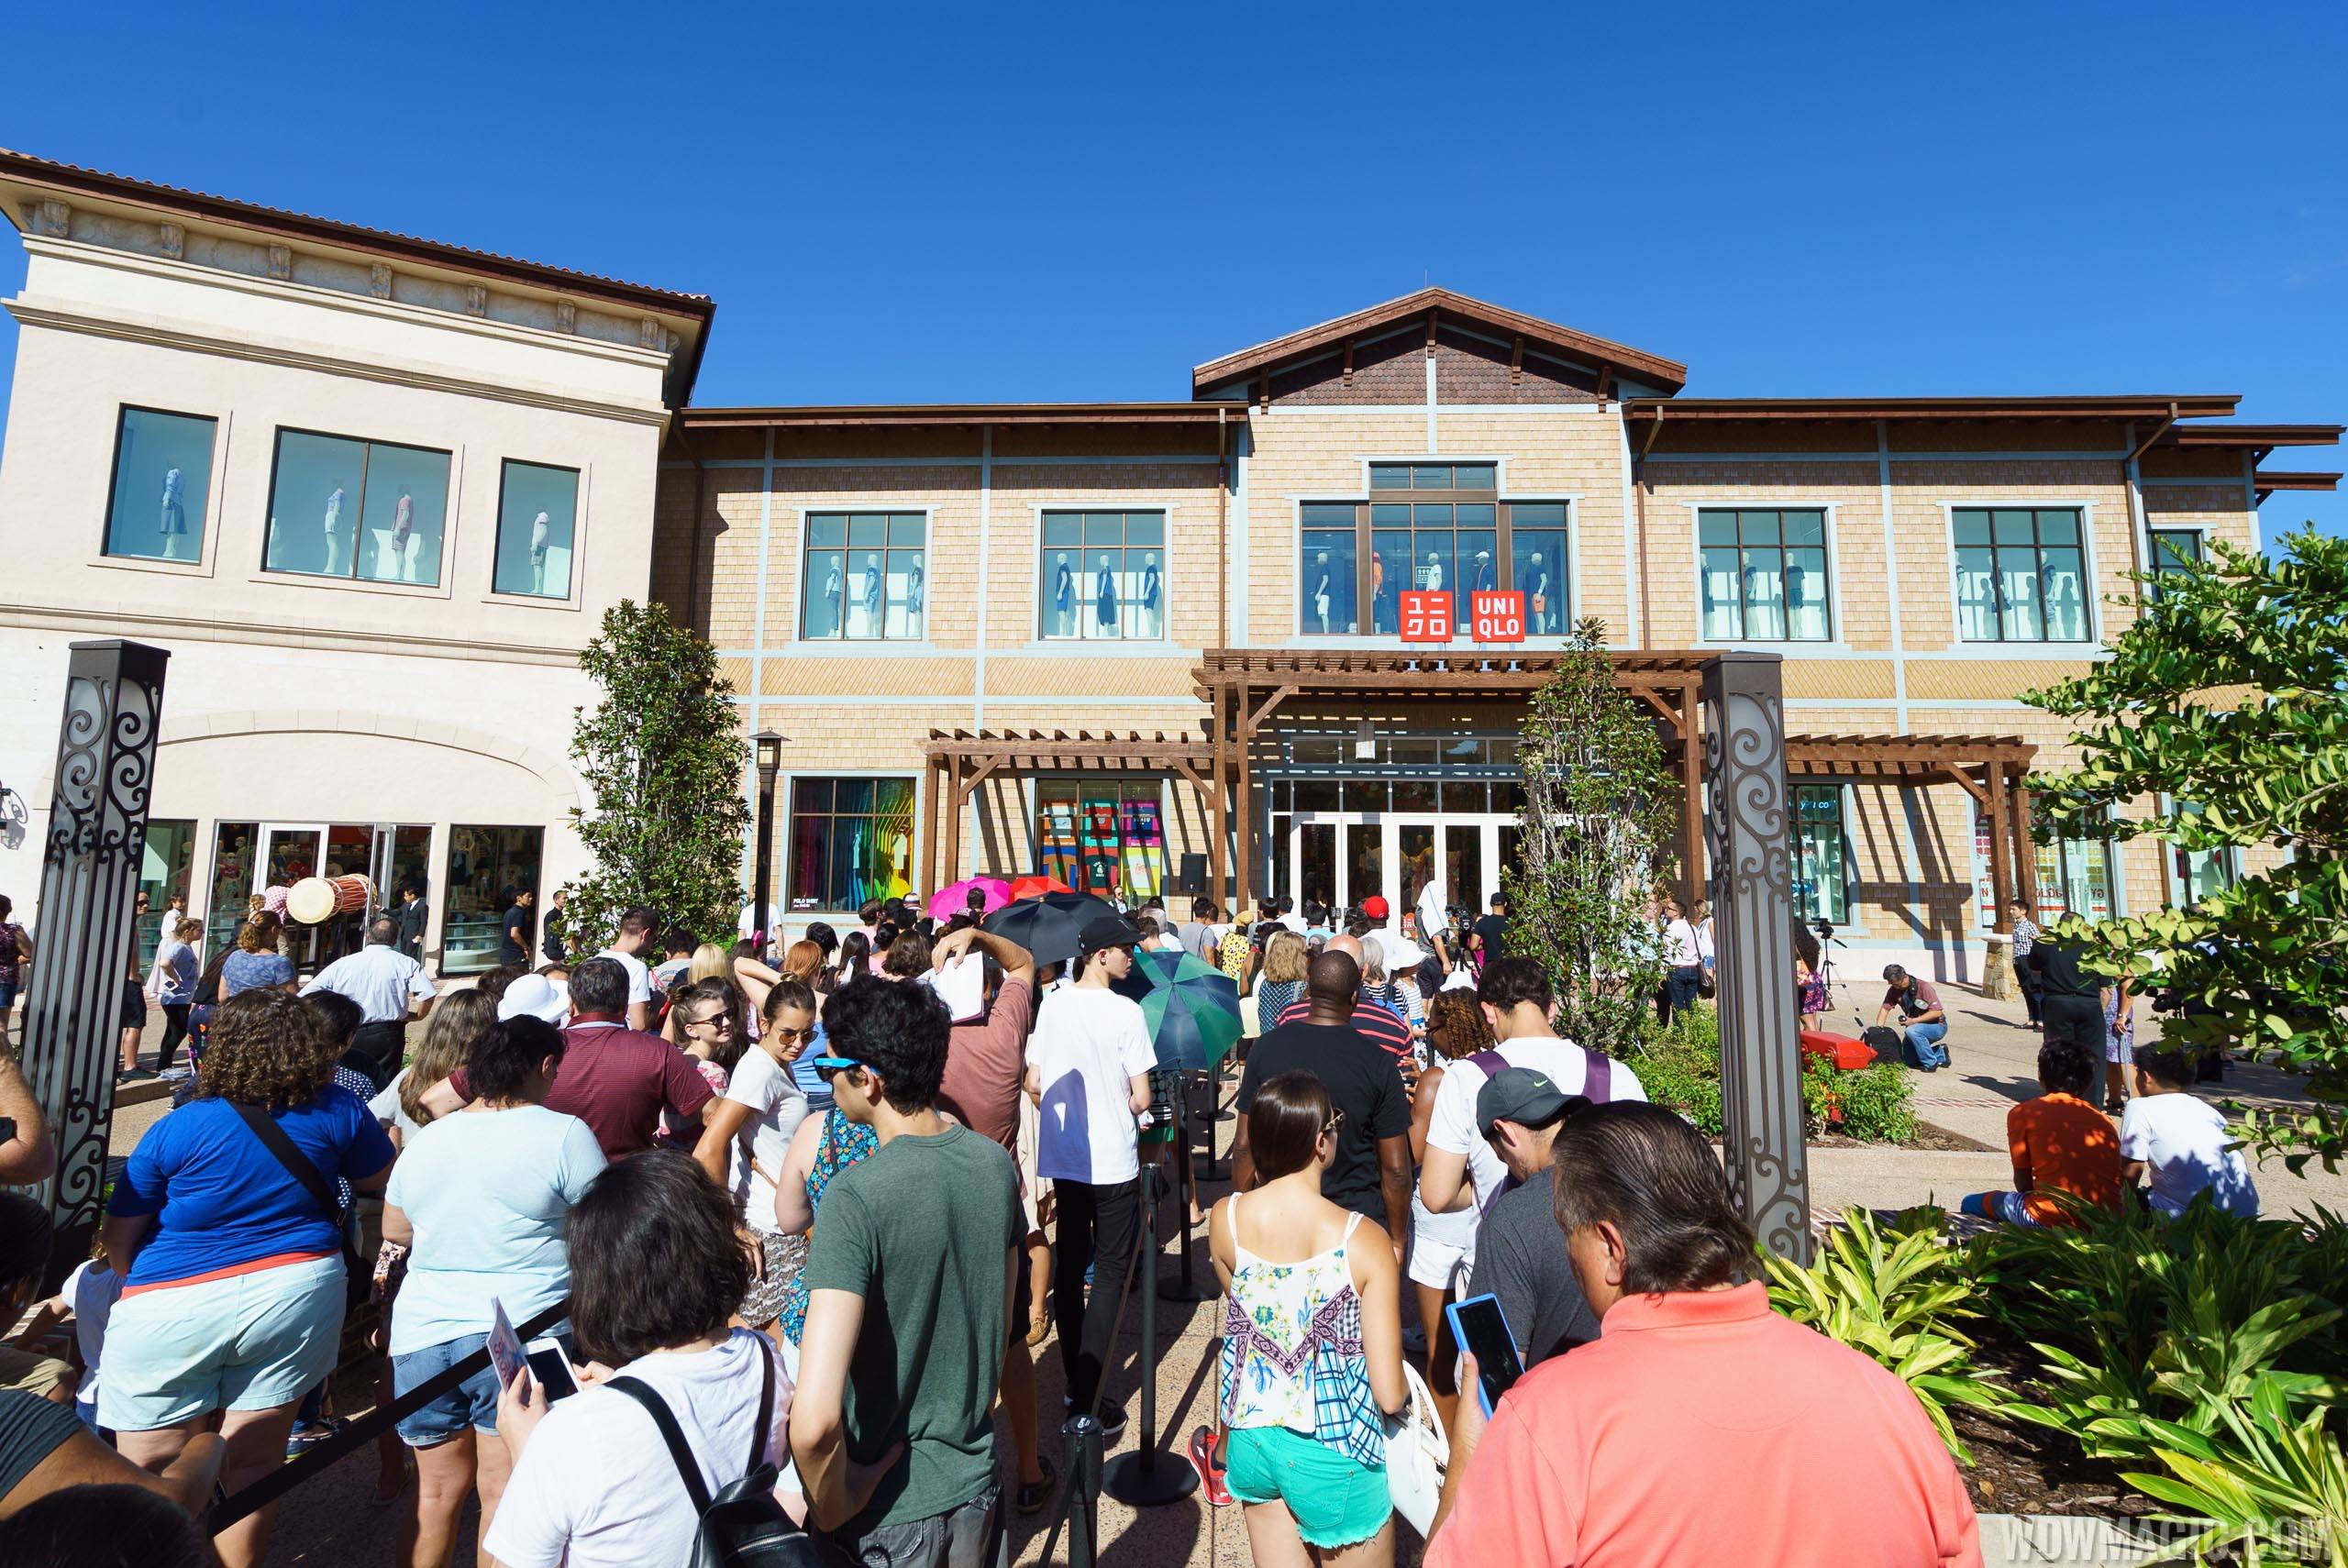 Crowds gather for the opening of UNIQLO at Disney Springs